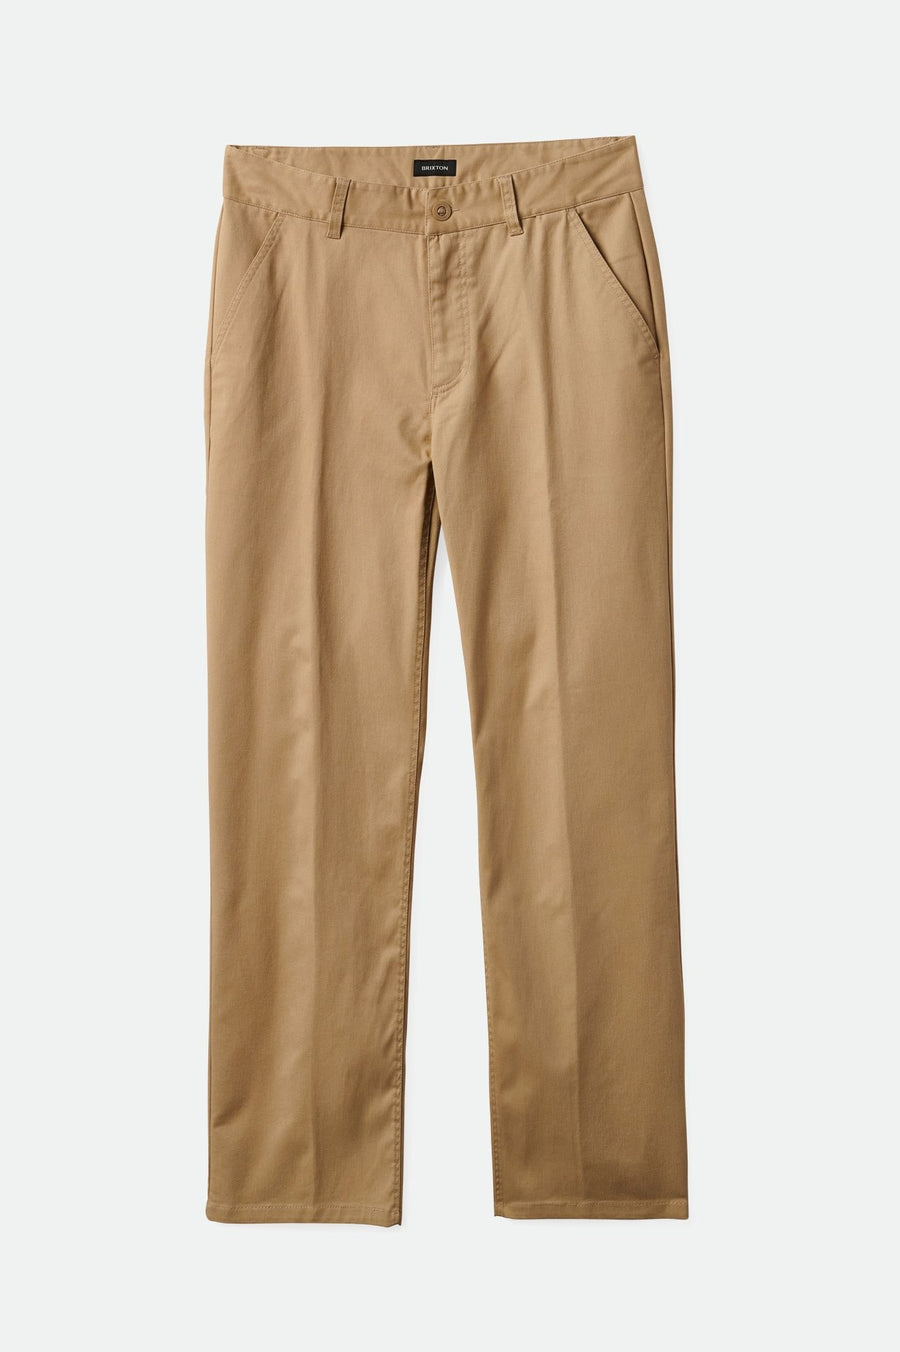 Brixton - Choice Chino Relaxed Pant in Sand